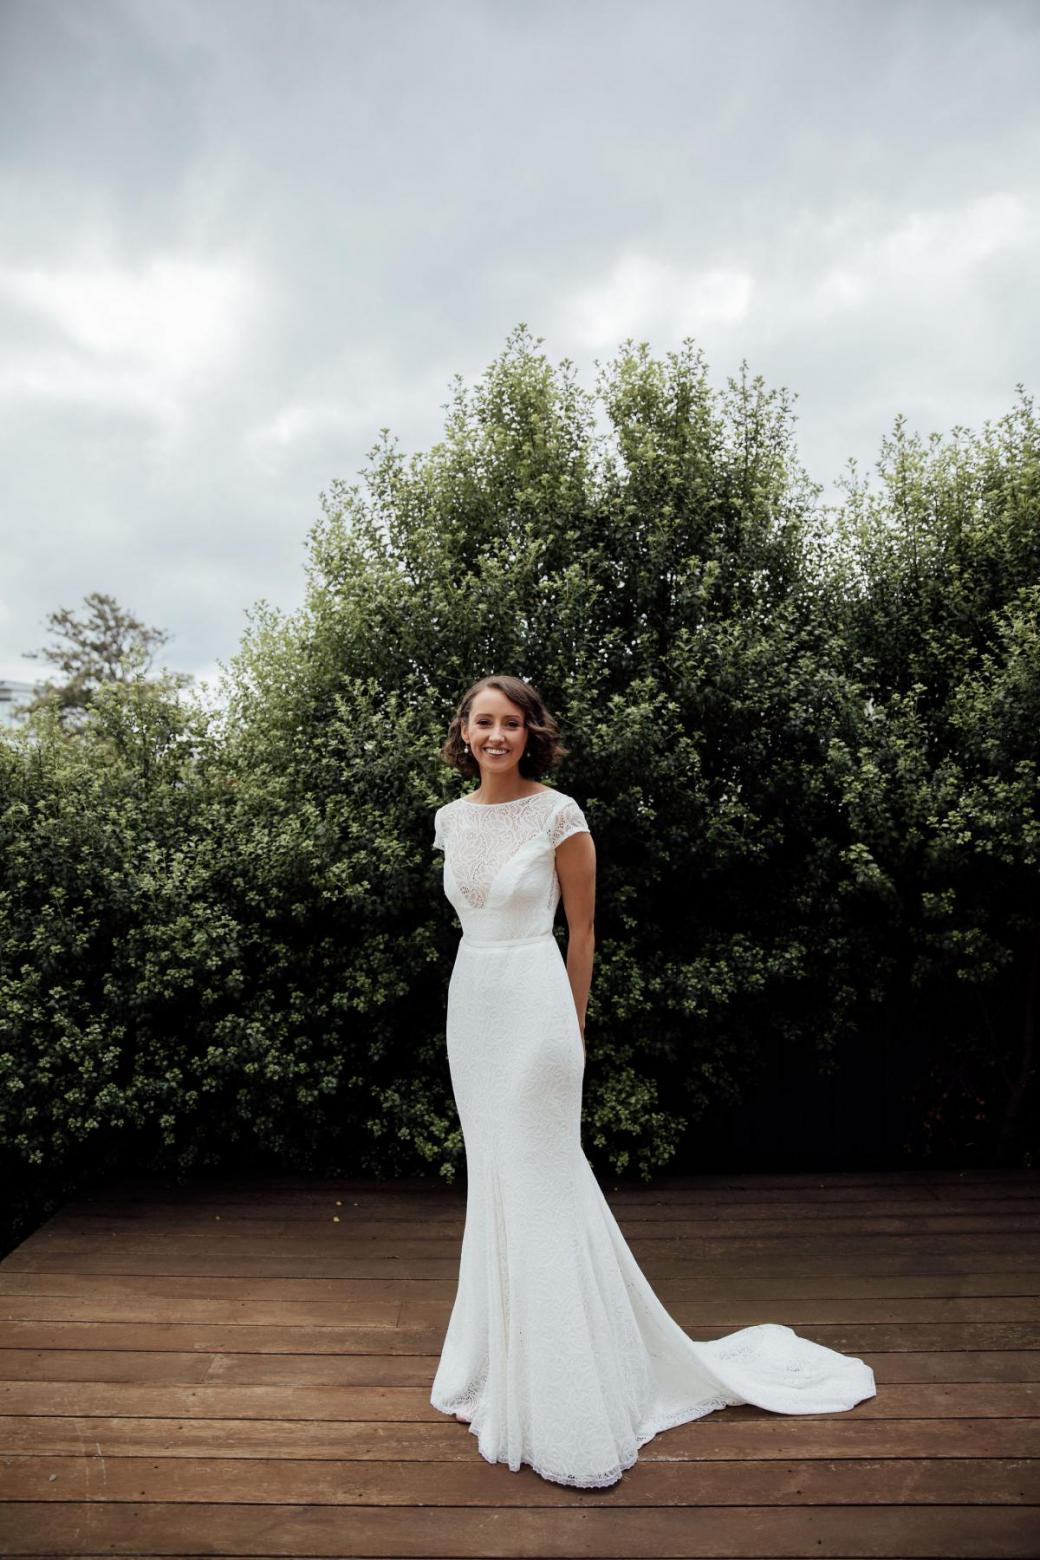 Real bride Amy wears the Wild Heart's Jemma gown by Karen Willis Holmes; with a sheer bodice and figure hugging skirt.